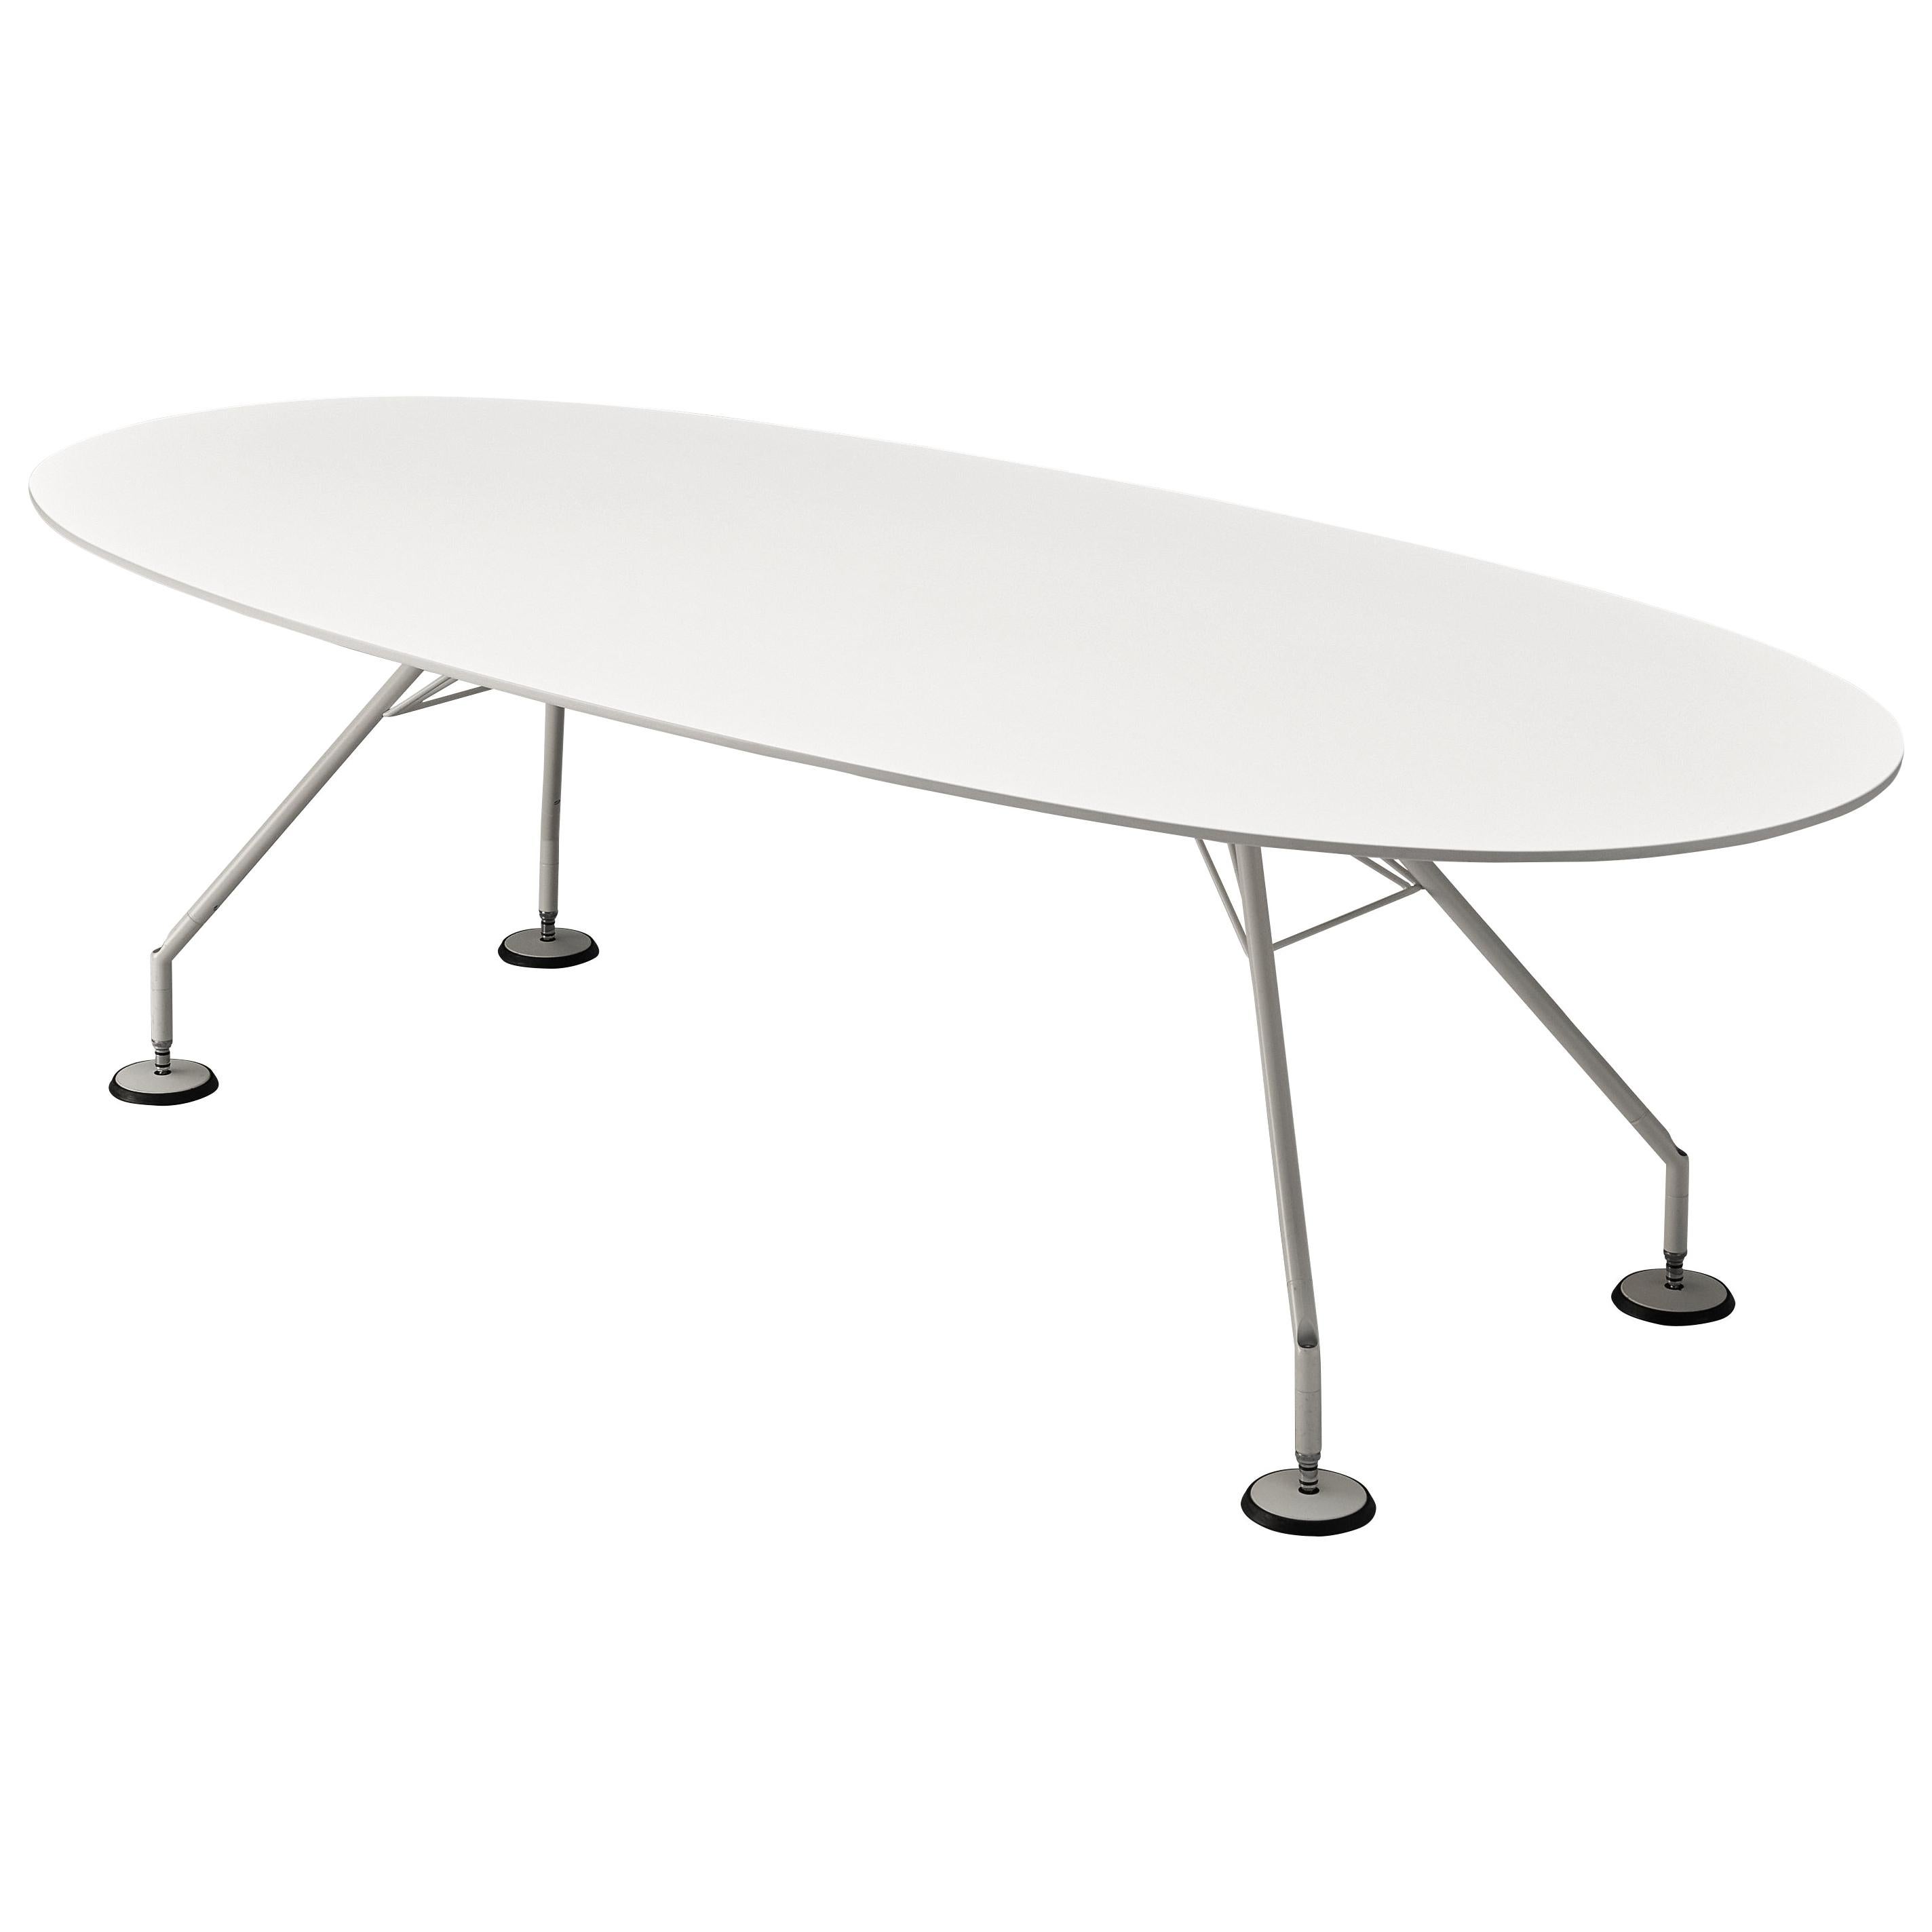 Norman Foster for Tecno ‘Nomos’ Dining or Conference Table in White